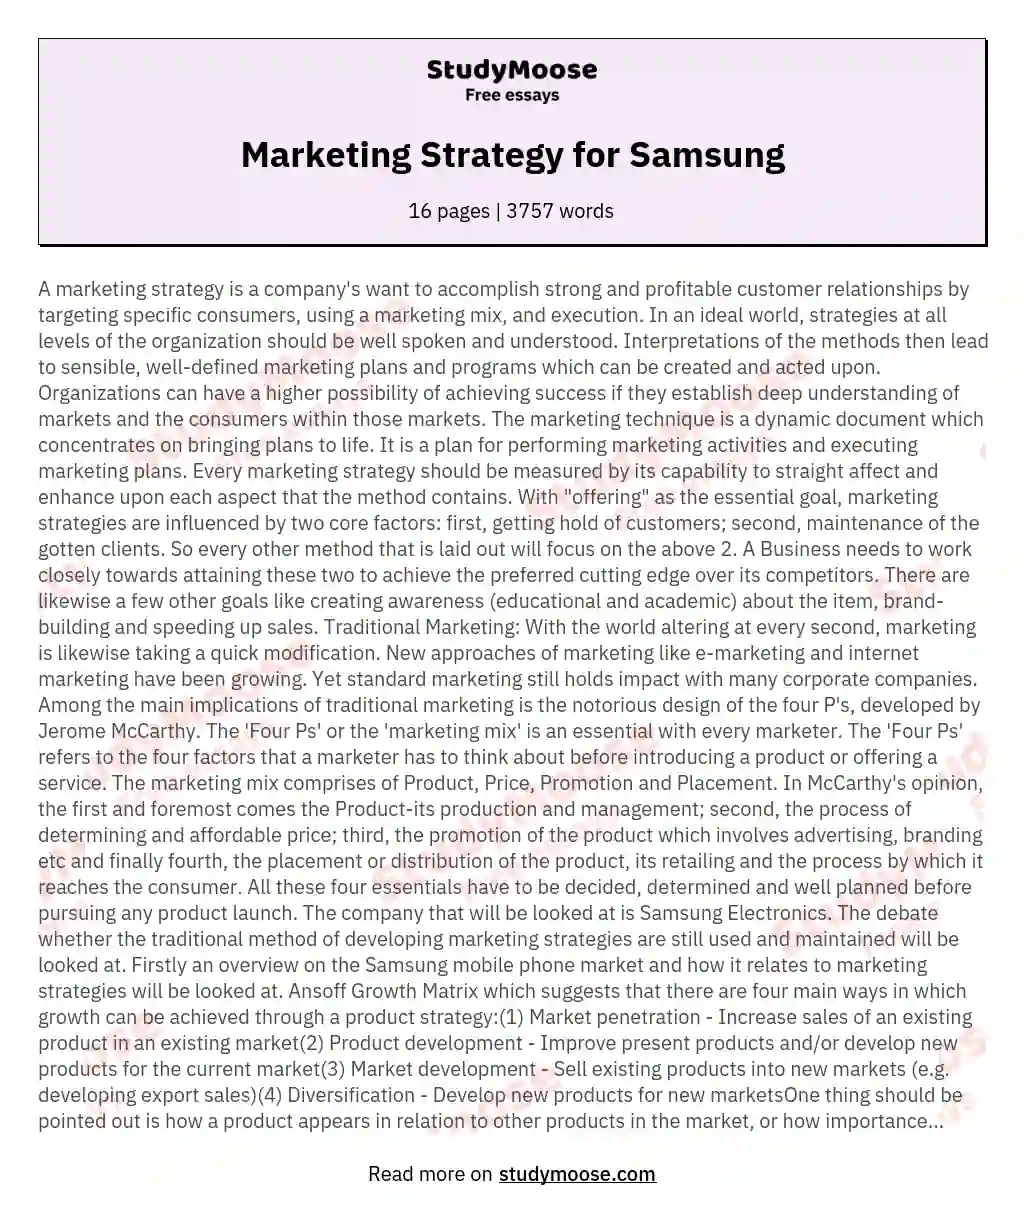 Marketing Strategy for Samsung